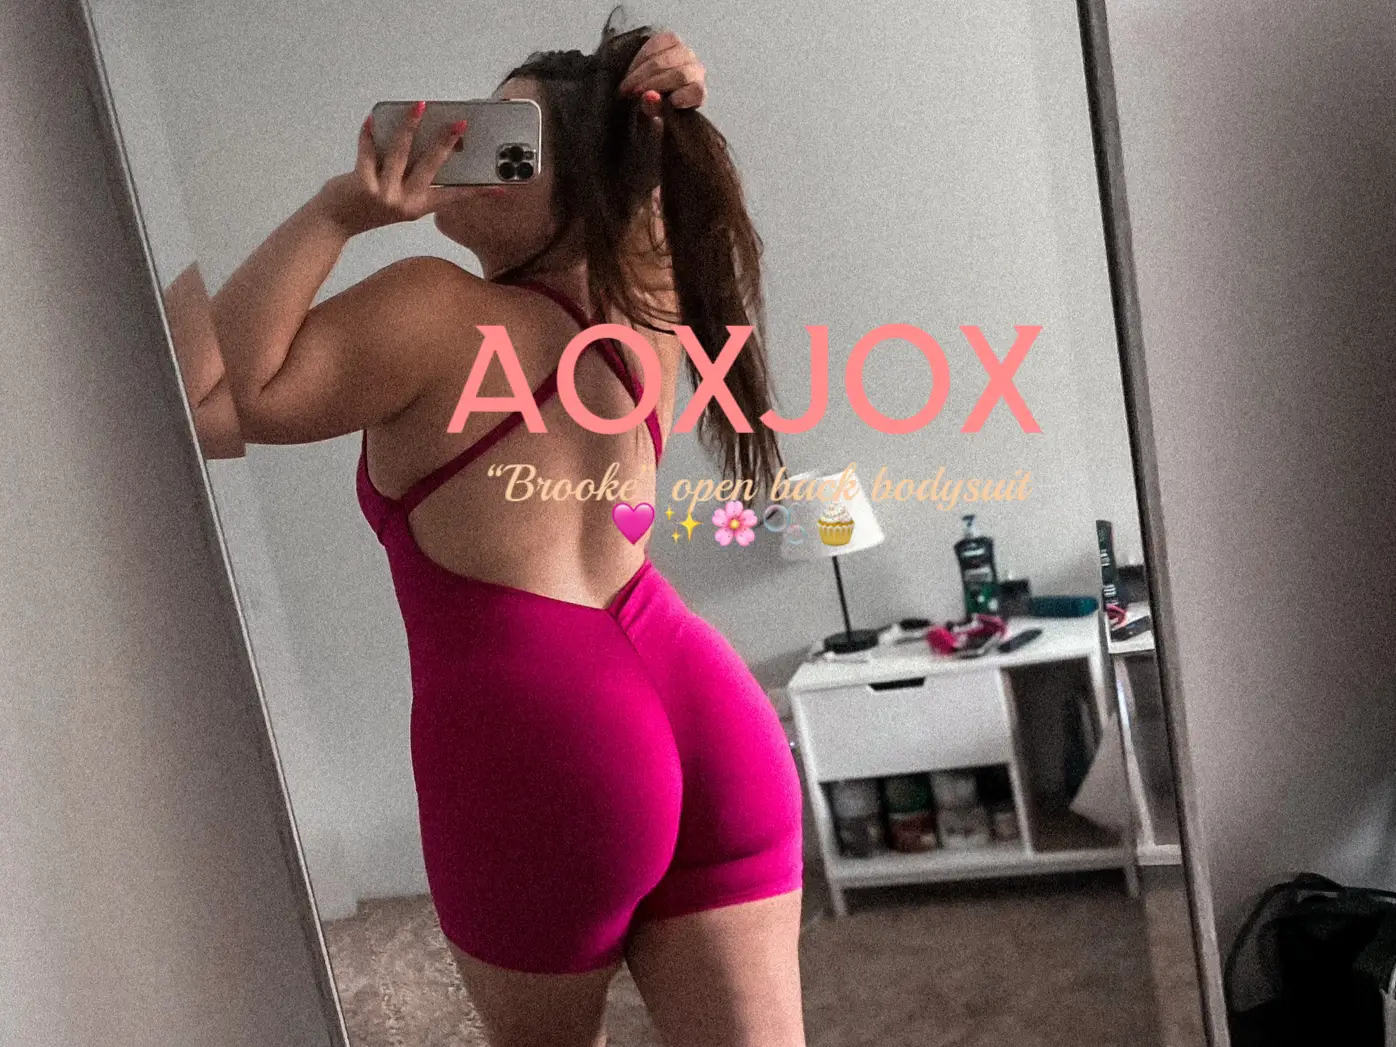 🩷🤍🩷🤍 AOXJOX 🩷🤍🩷🤍, Gallery posted by Marmarfit